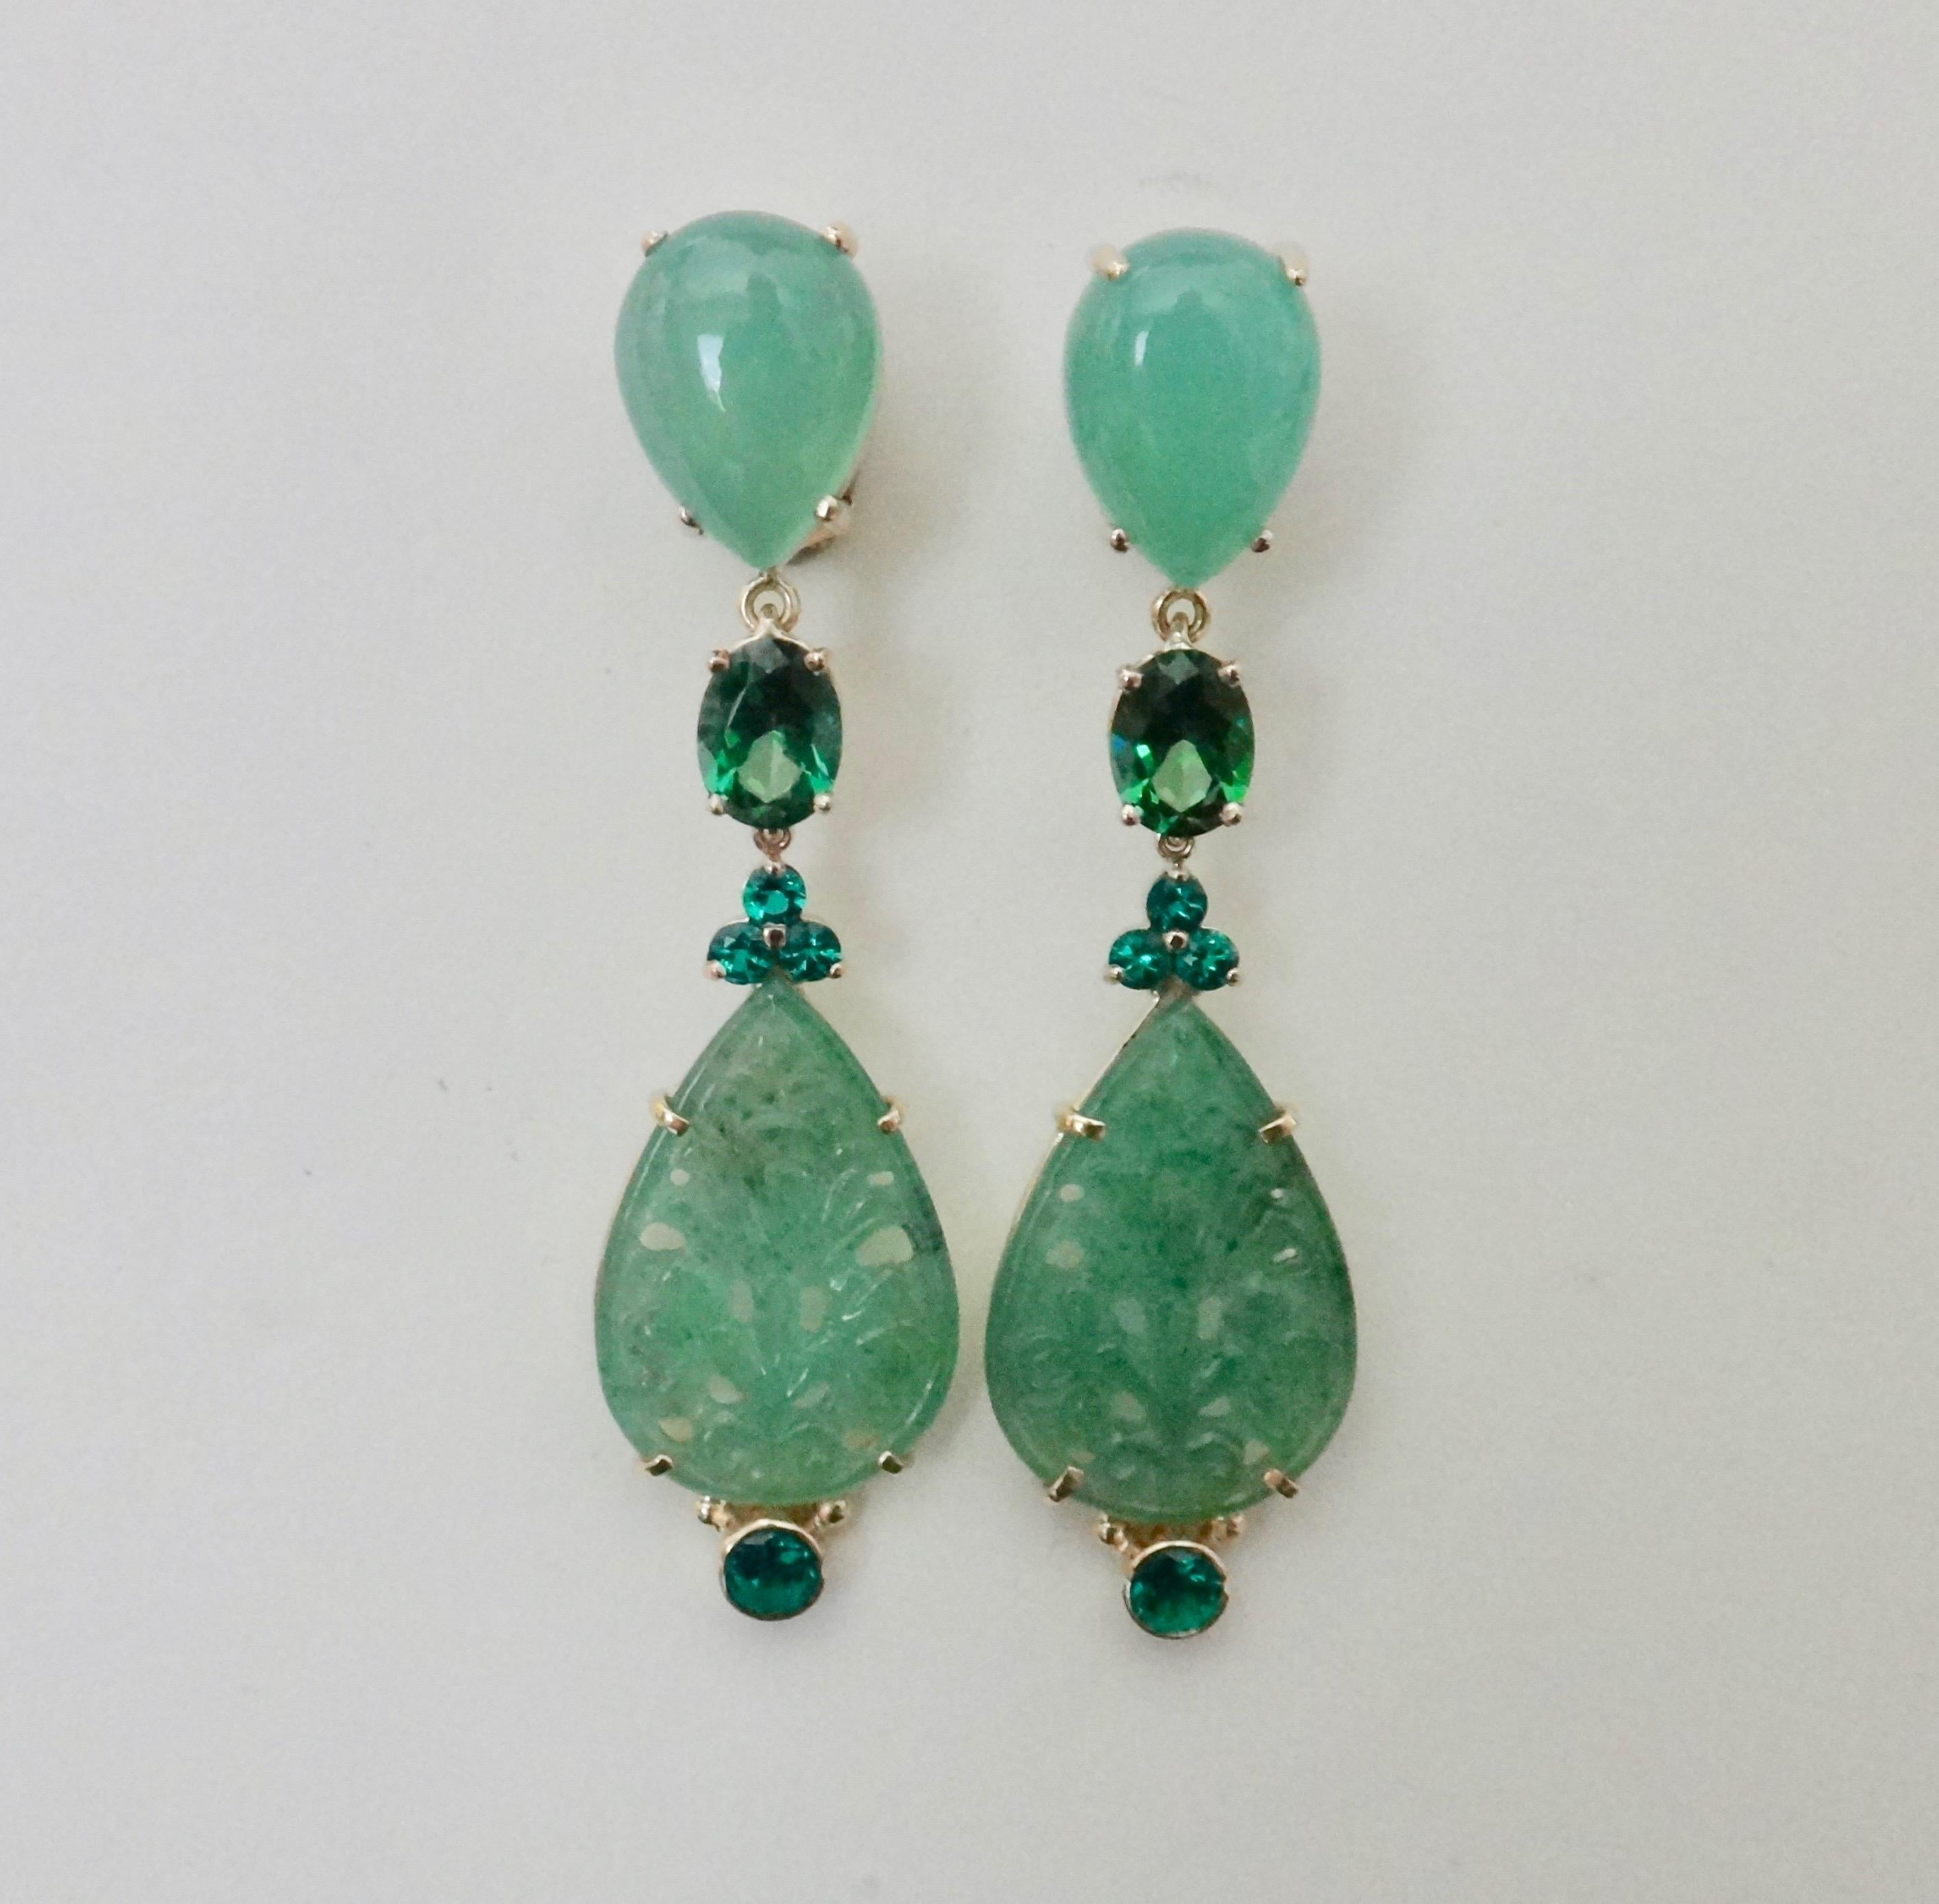 A monochromatic color scheme of greens comprise these dangle earrings.  The composition begins with pear shaped cabochon chrysoprase (origin: Australia), followed by green topaz, chrome diopside (origin: India) and finally, pale green carved